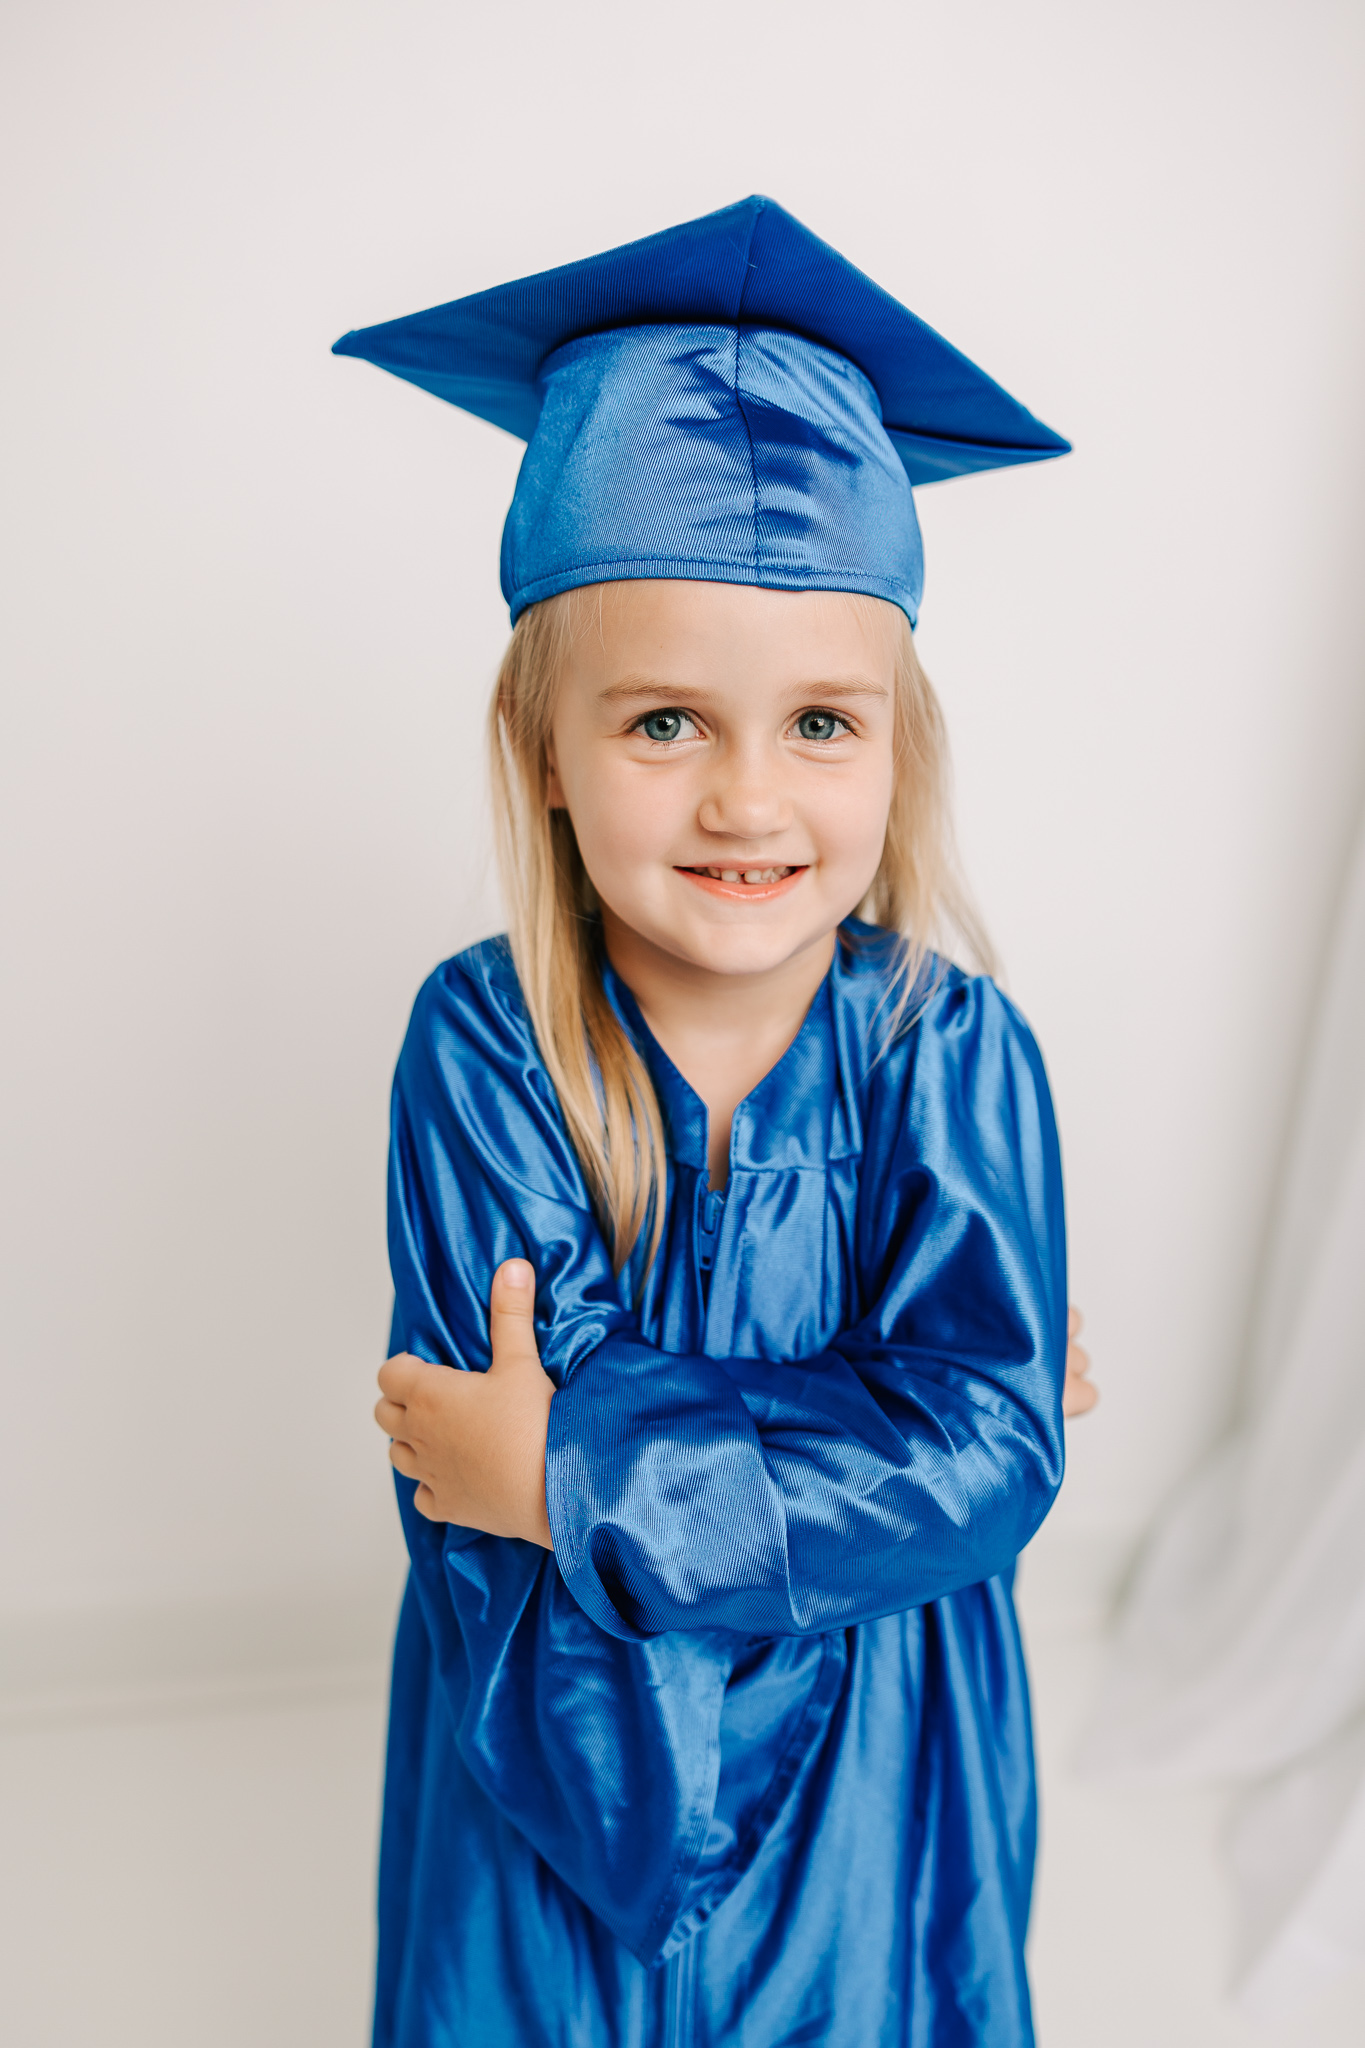 5 year old girl dancing in the studio during her recent milestone graduation session. Little girl is excited to use Kaitlyn Marie & Co. for further parties.